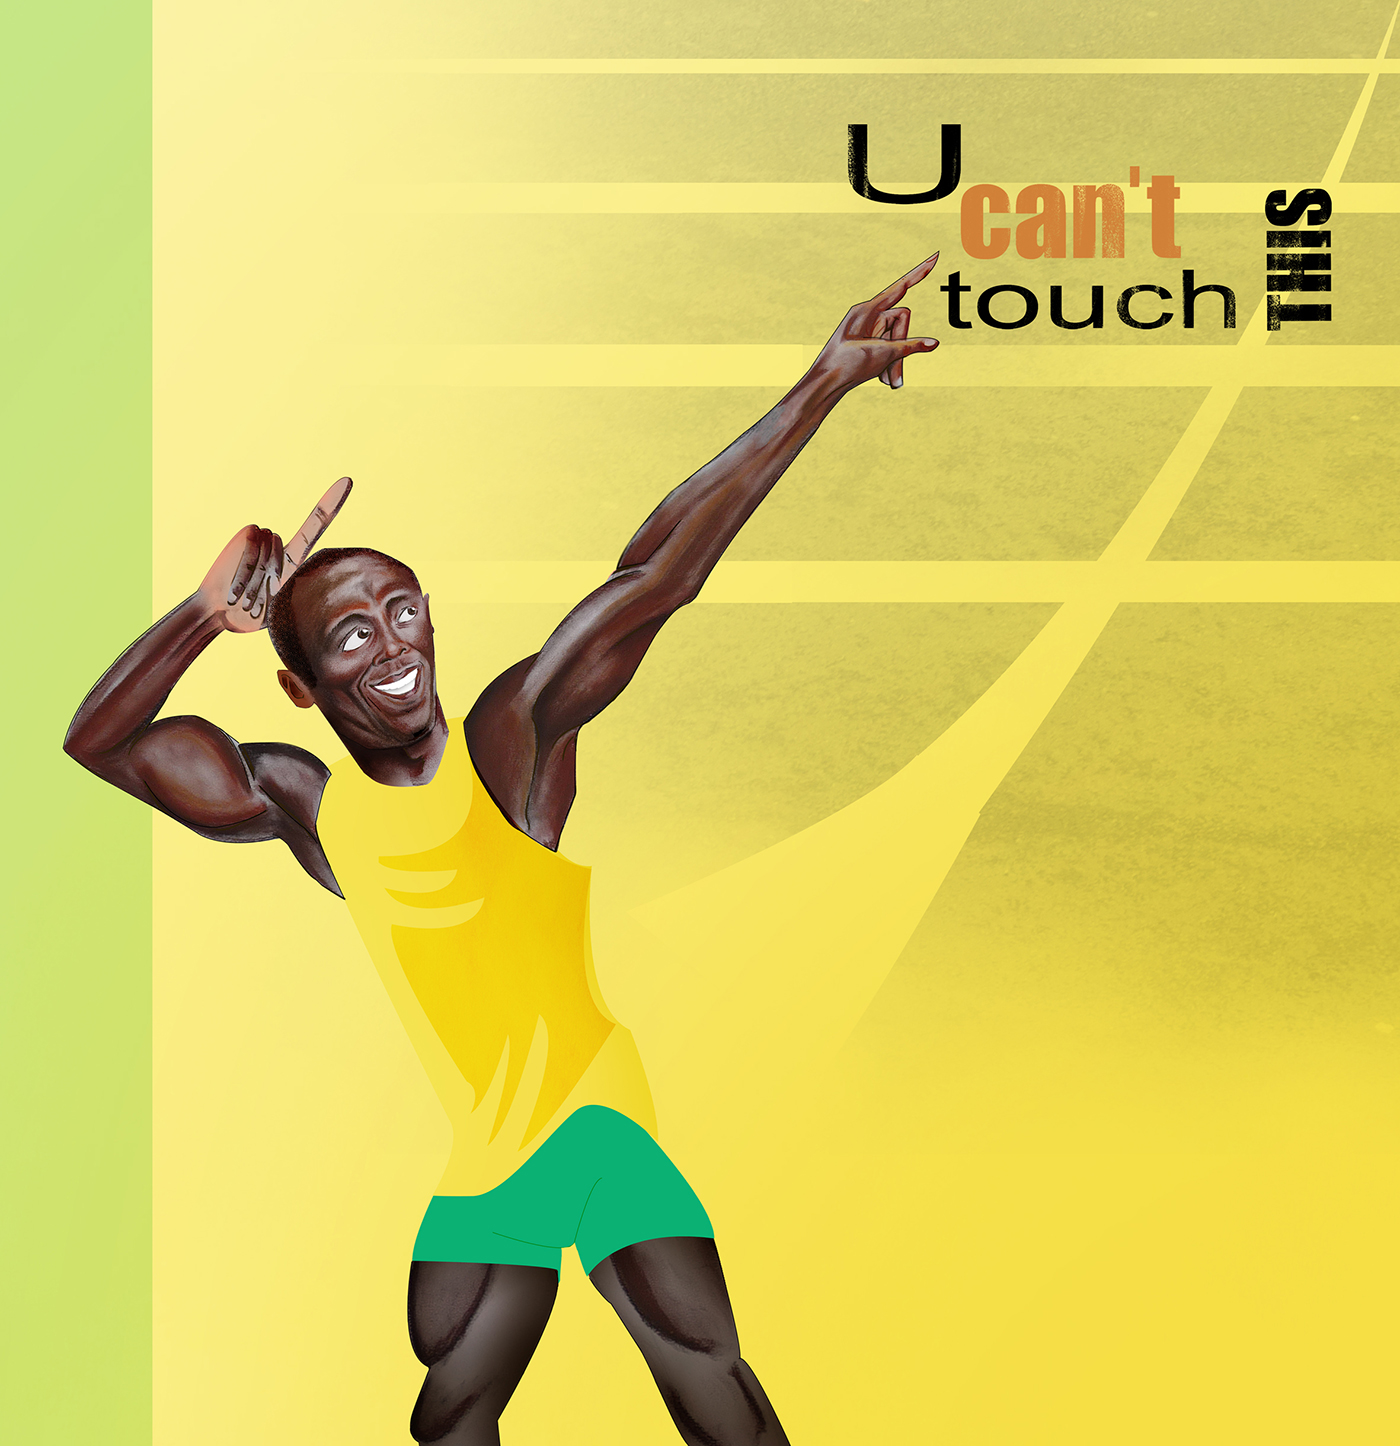 Usain Bolt - you can't touch this